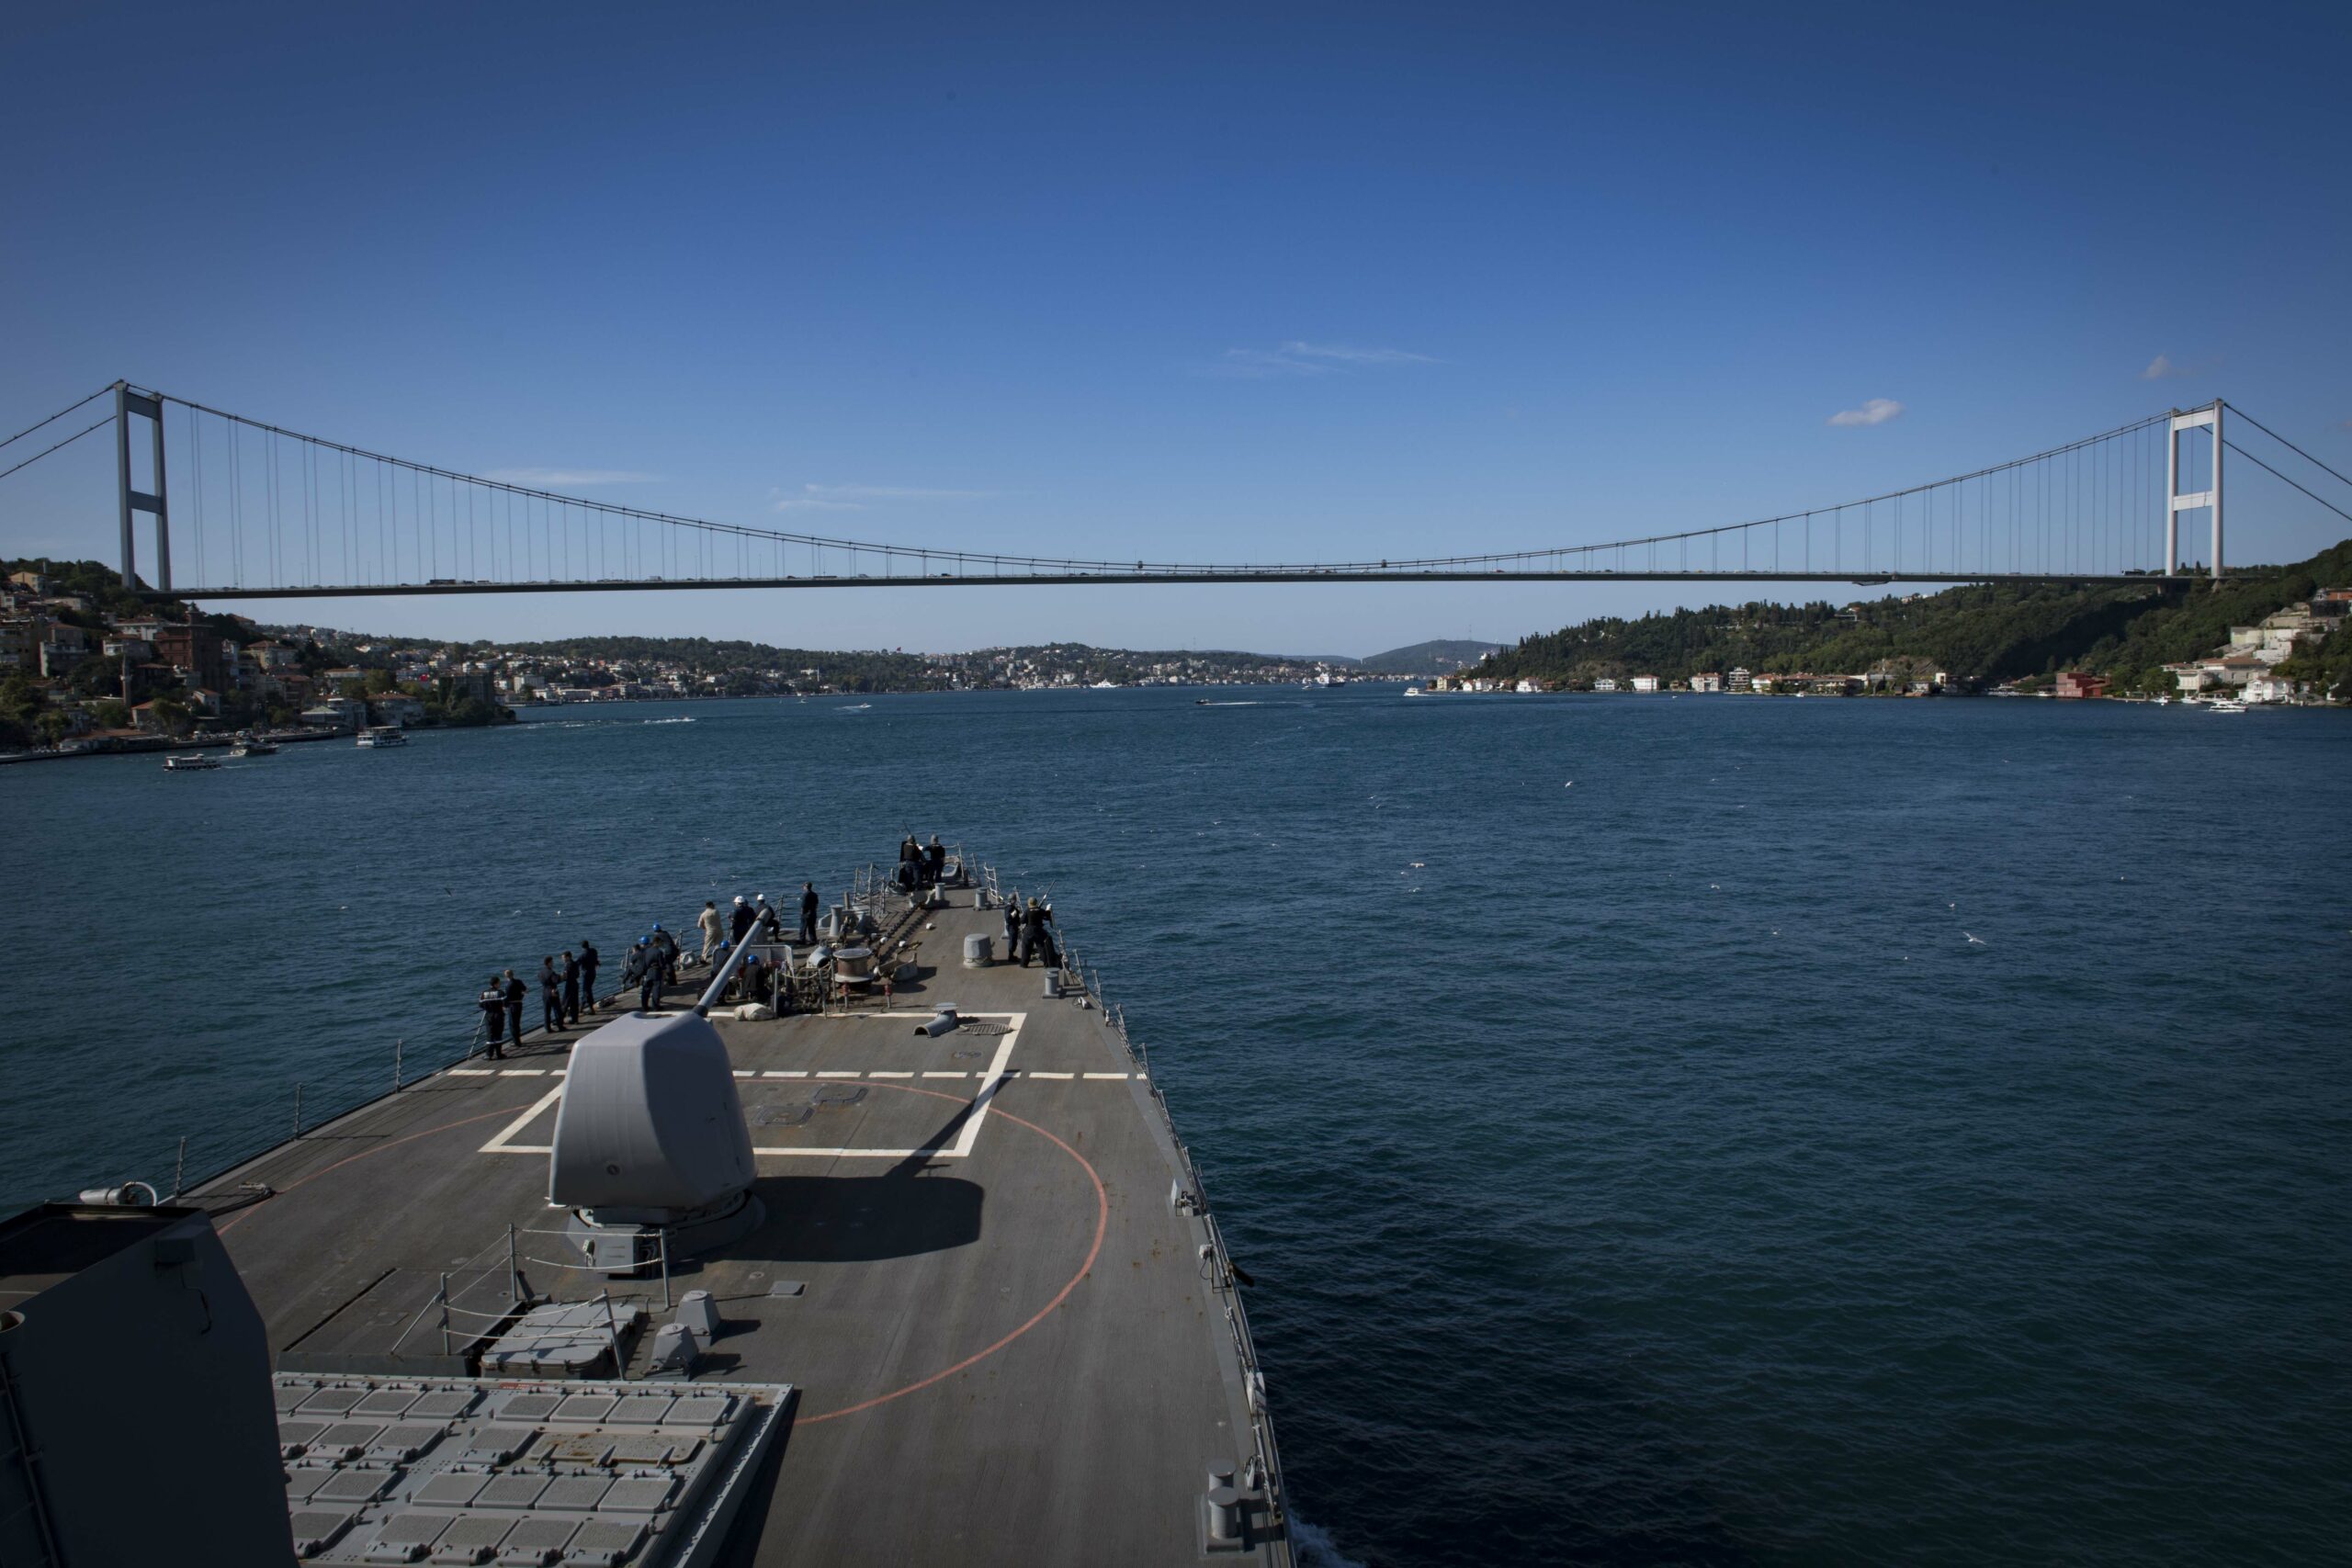 he Arleigh Burke-class guided-missile destroyer USS Carney (DDG 64) transits the Bosphorus Strait